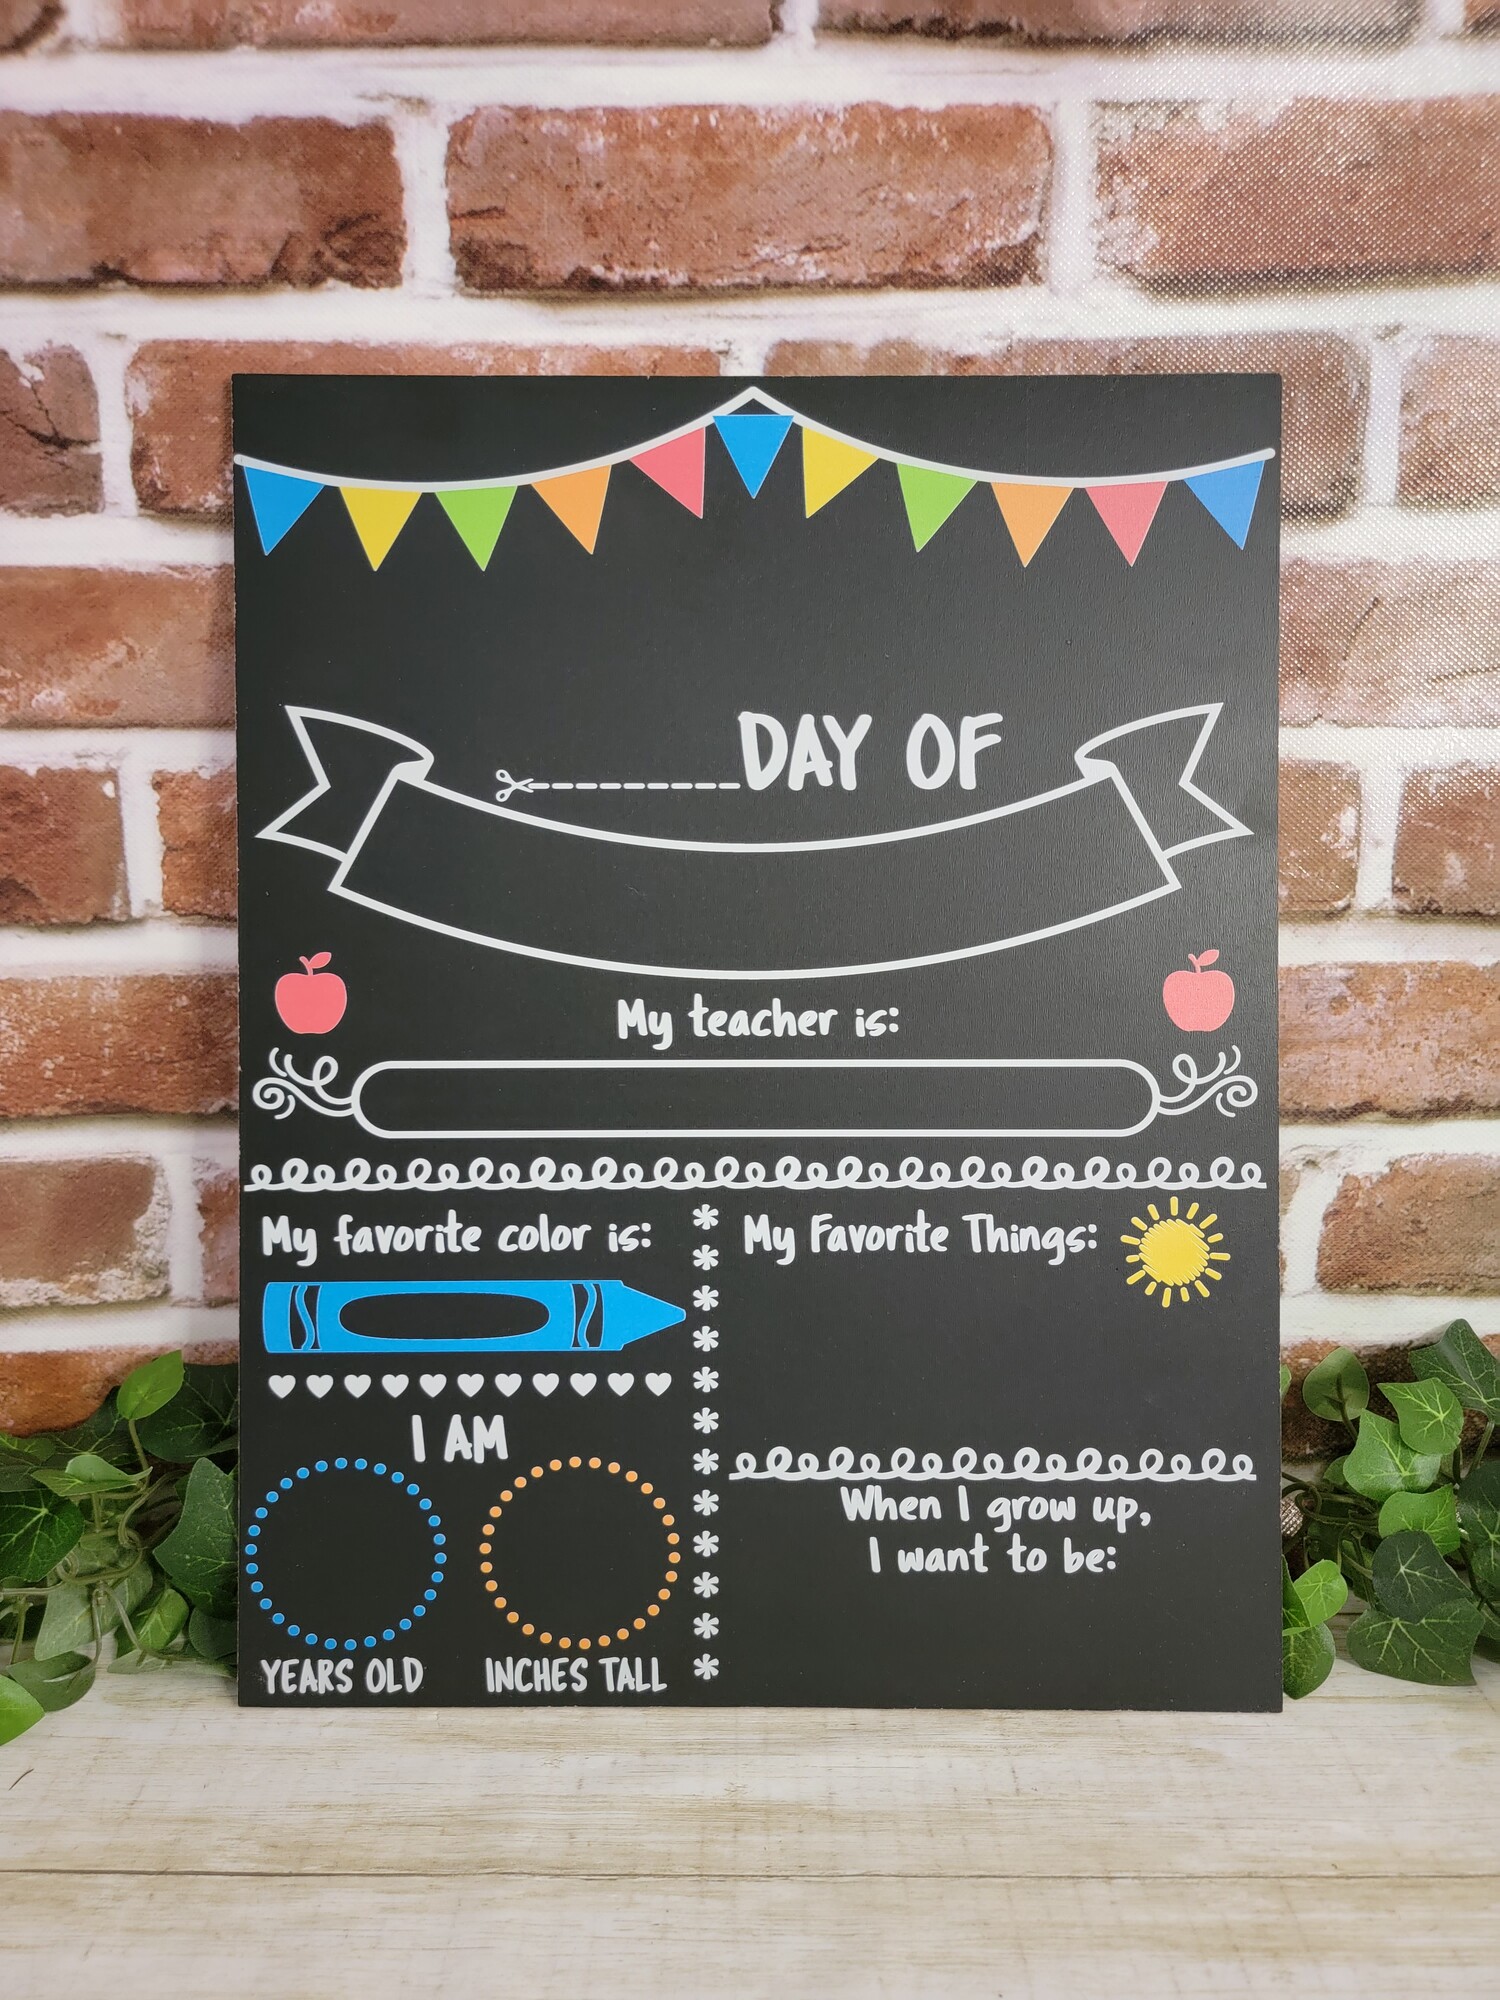 Your child's first day of school is a big deal!

Your back to school board will be perfect for keeping track of the stats that matter most.  Add the special touch to your first day of school photos with this one of a kind photo prop. This chalkboard sign is reusable and can be for the first day of kindergarten; 1st day of homeschool; last day of school; or any other milestone you can think of.

The chalkboard measures approx. 11.75 x 15' with a quality chalkboard surface; allowing you to use chalk or chalk markers.

Clean with water in 24 hours of writing and store away until next year. Available in pastel or primary colors

****colors vary****